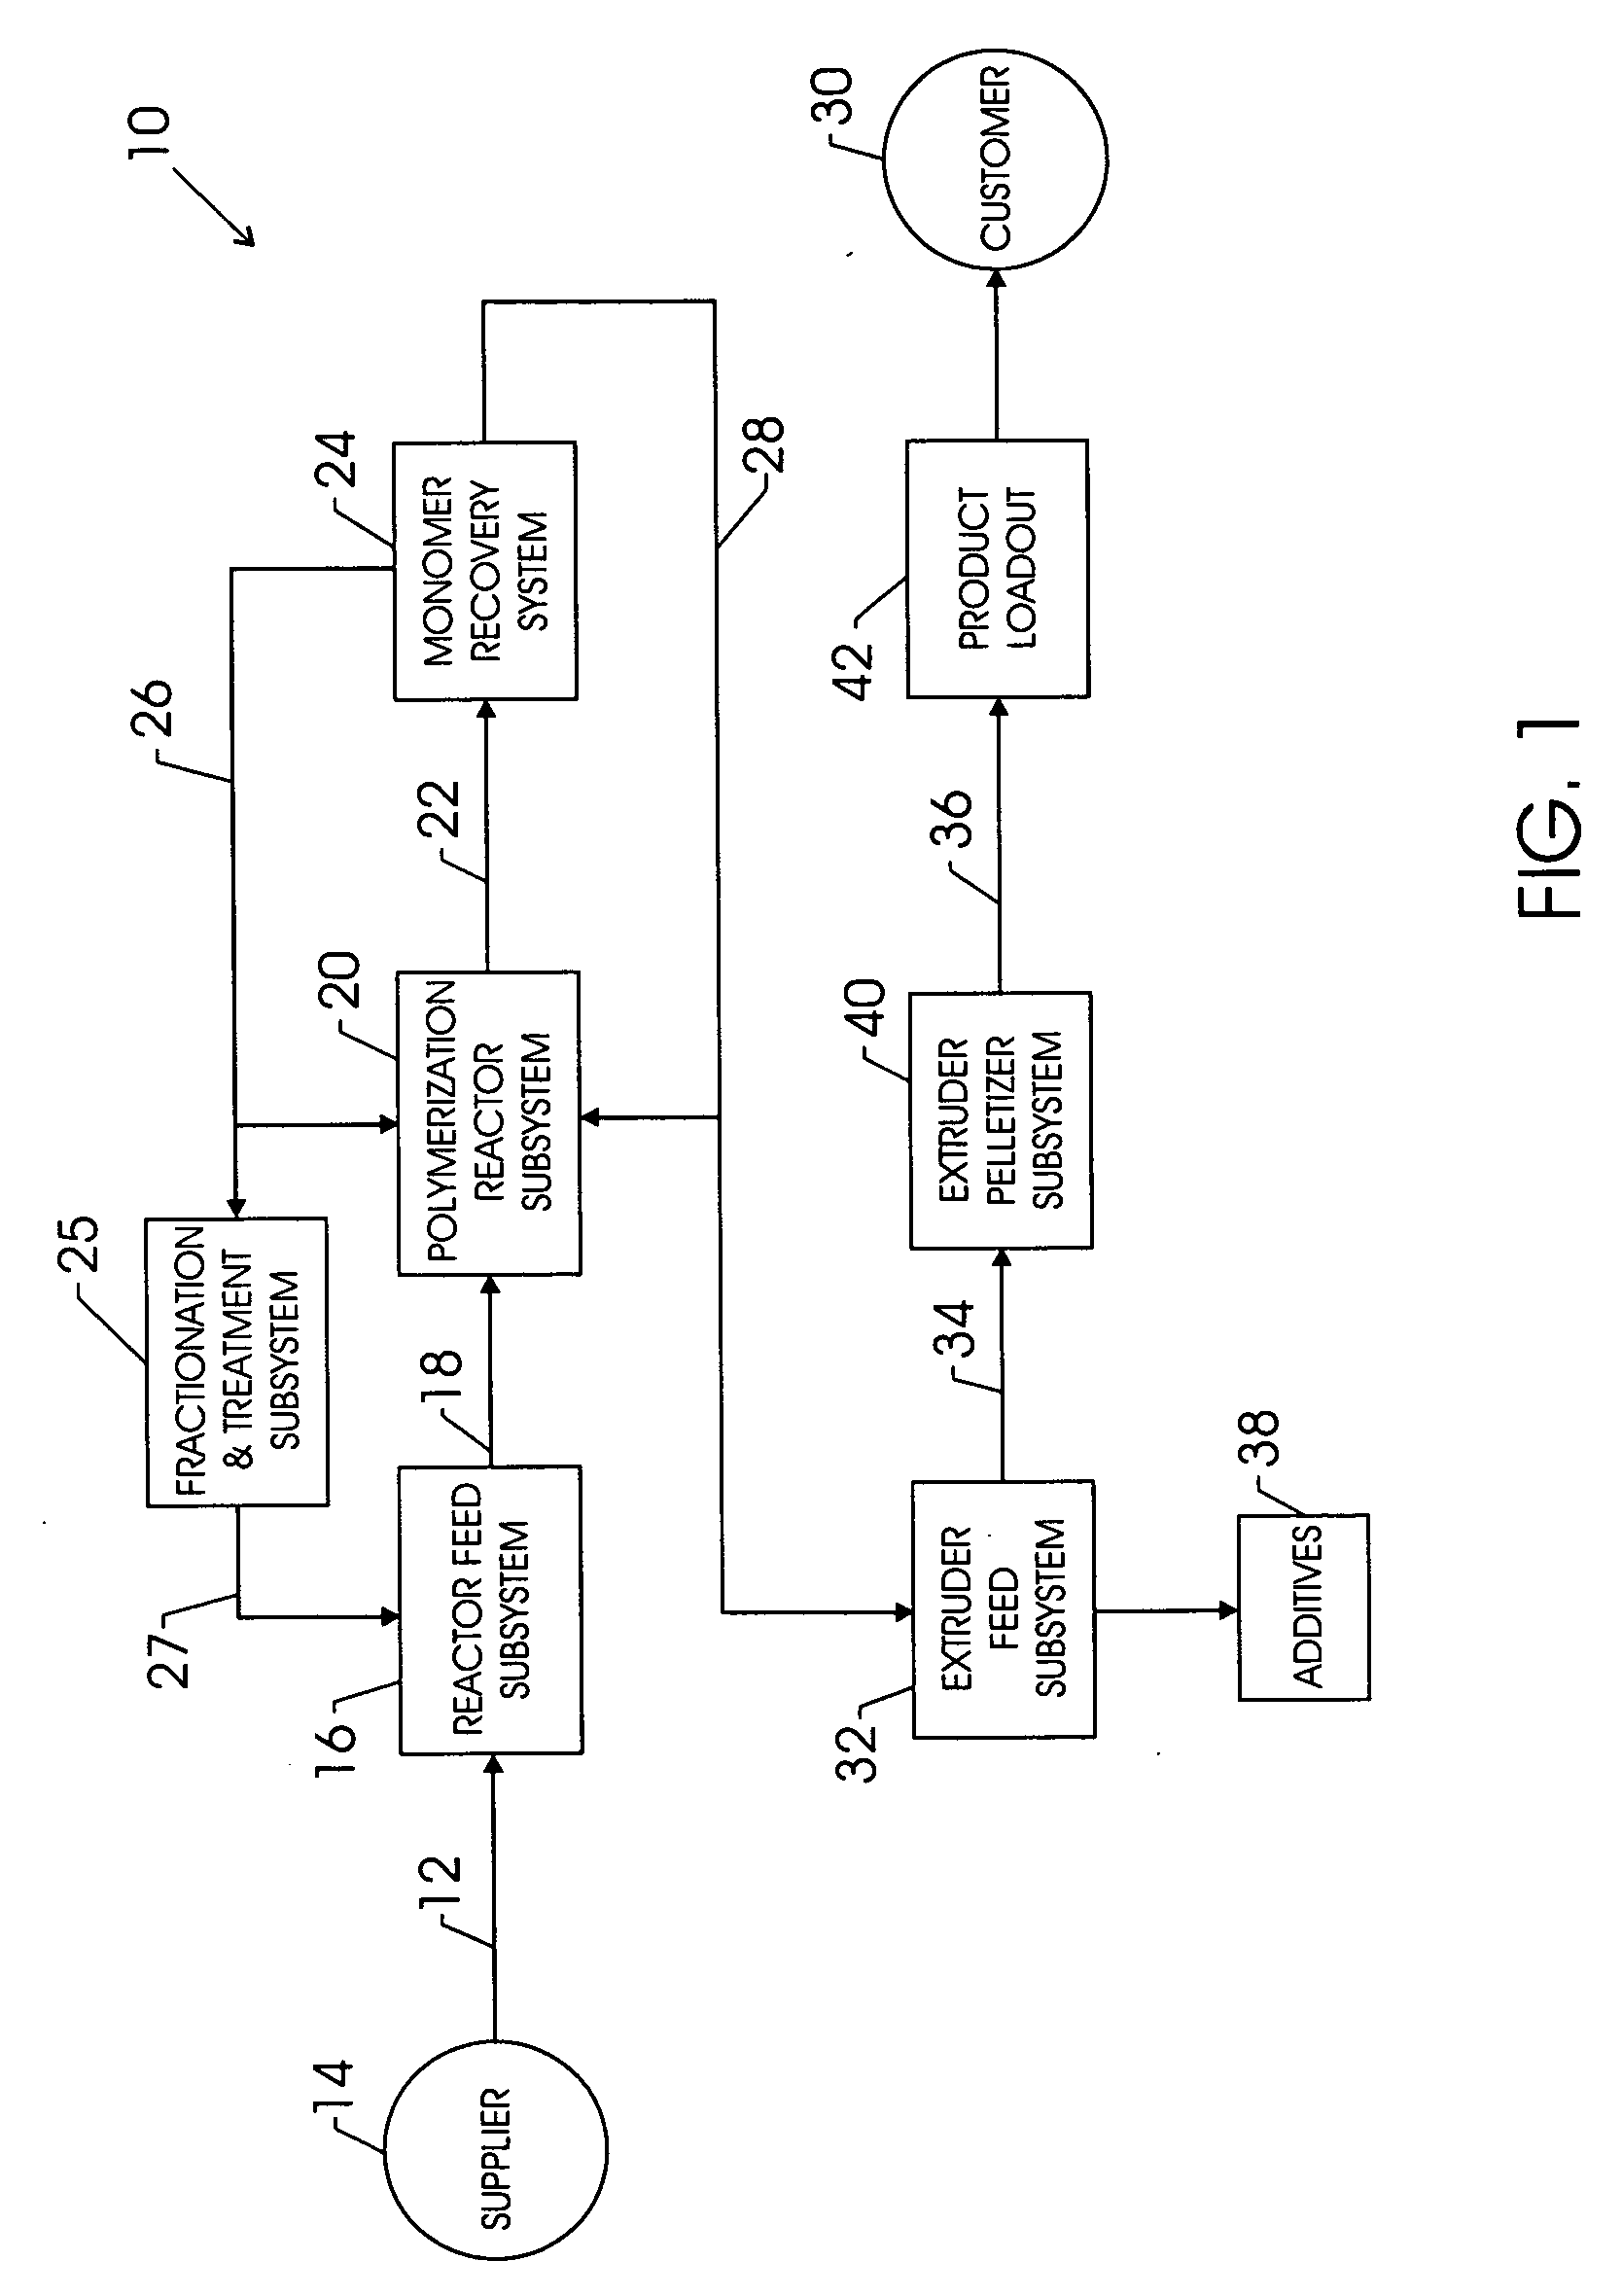 Method and apparatus for monitoring polyolefin production